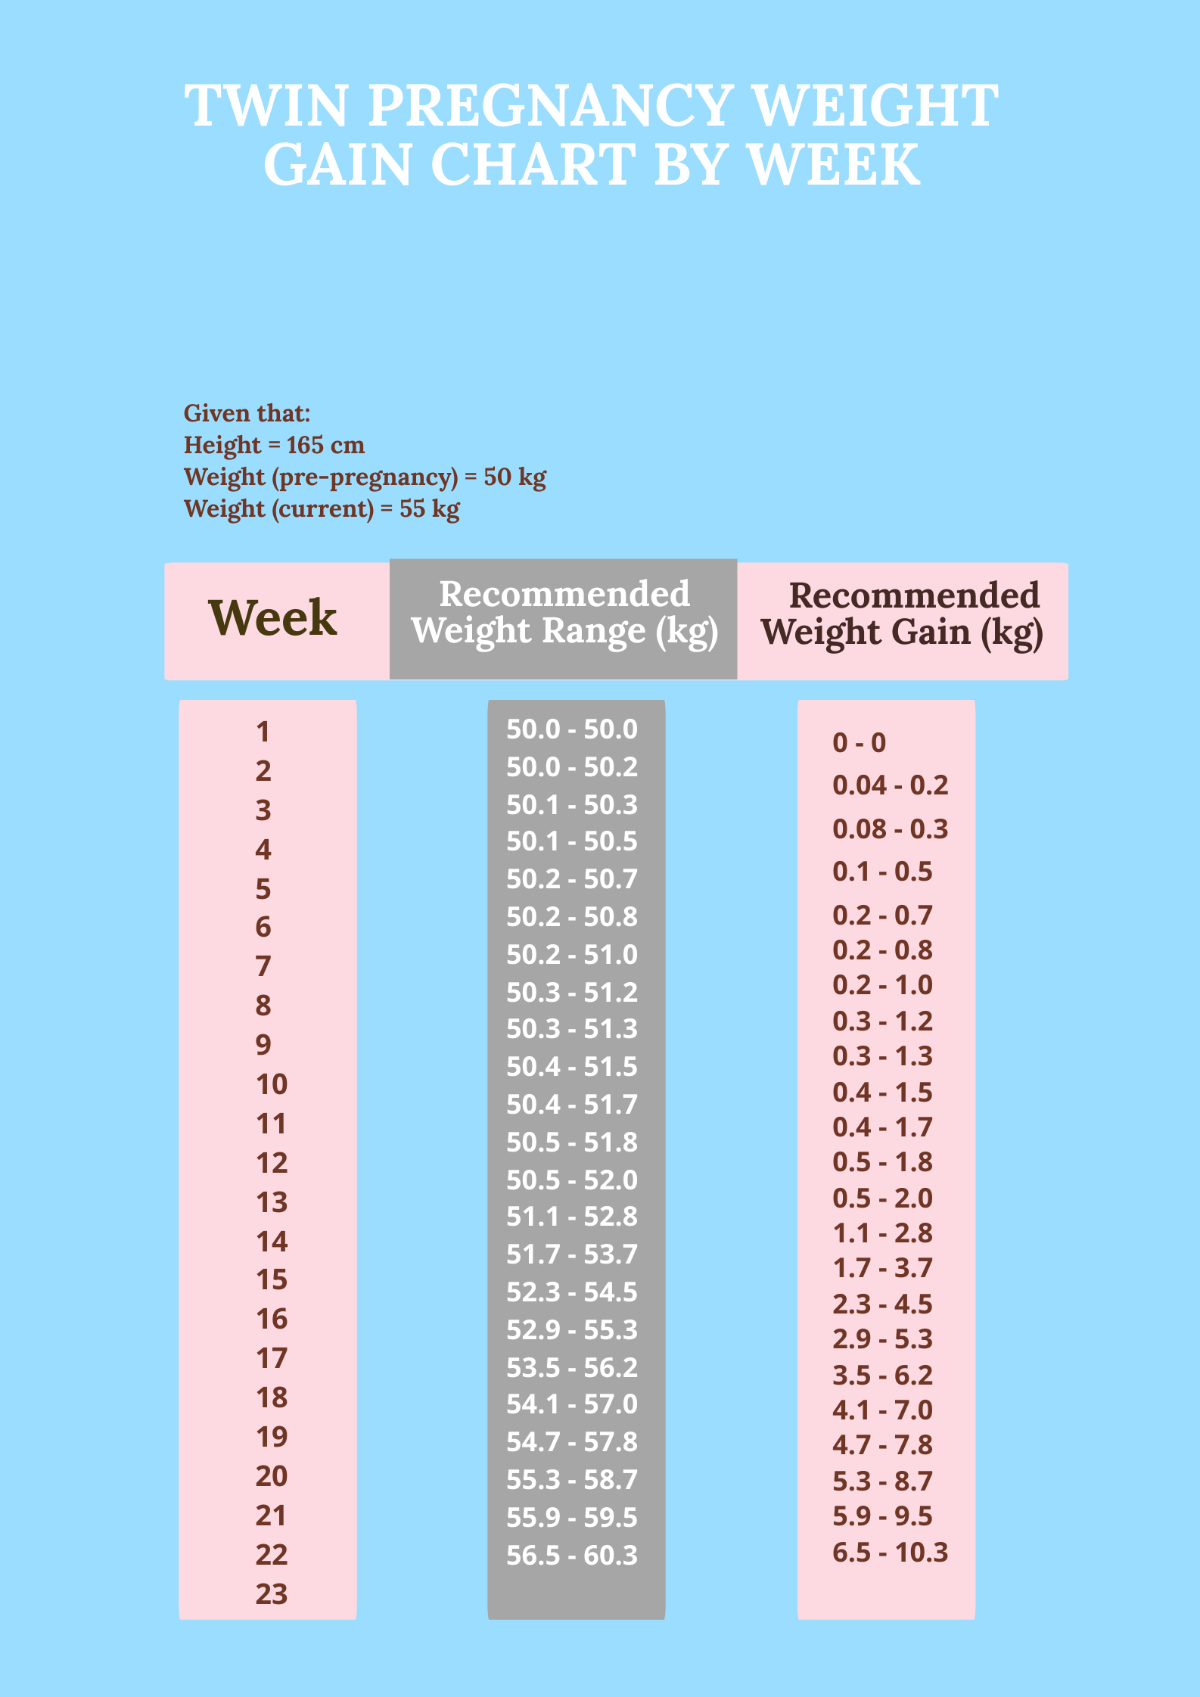 FREE Pregnancy Weight Gain Chart Templates & Examples - Edit Online ...